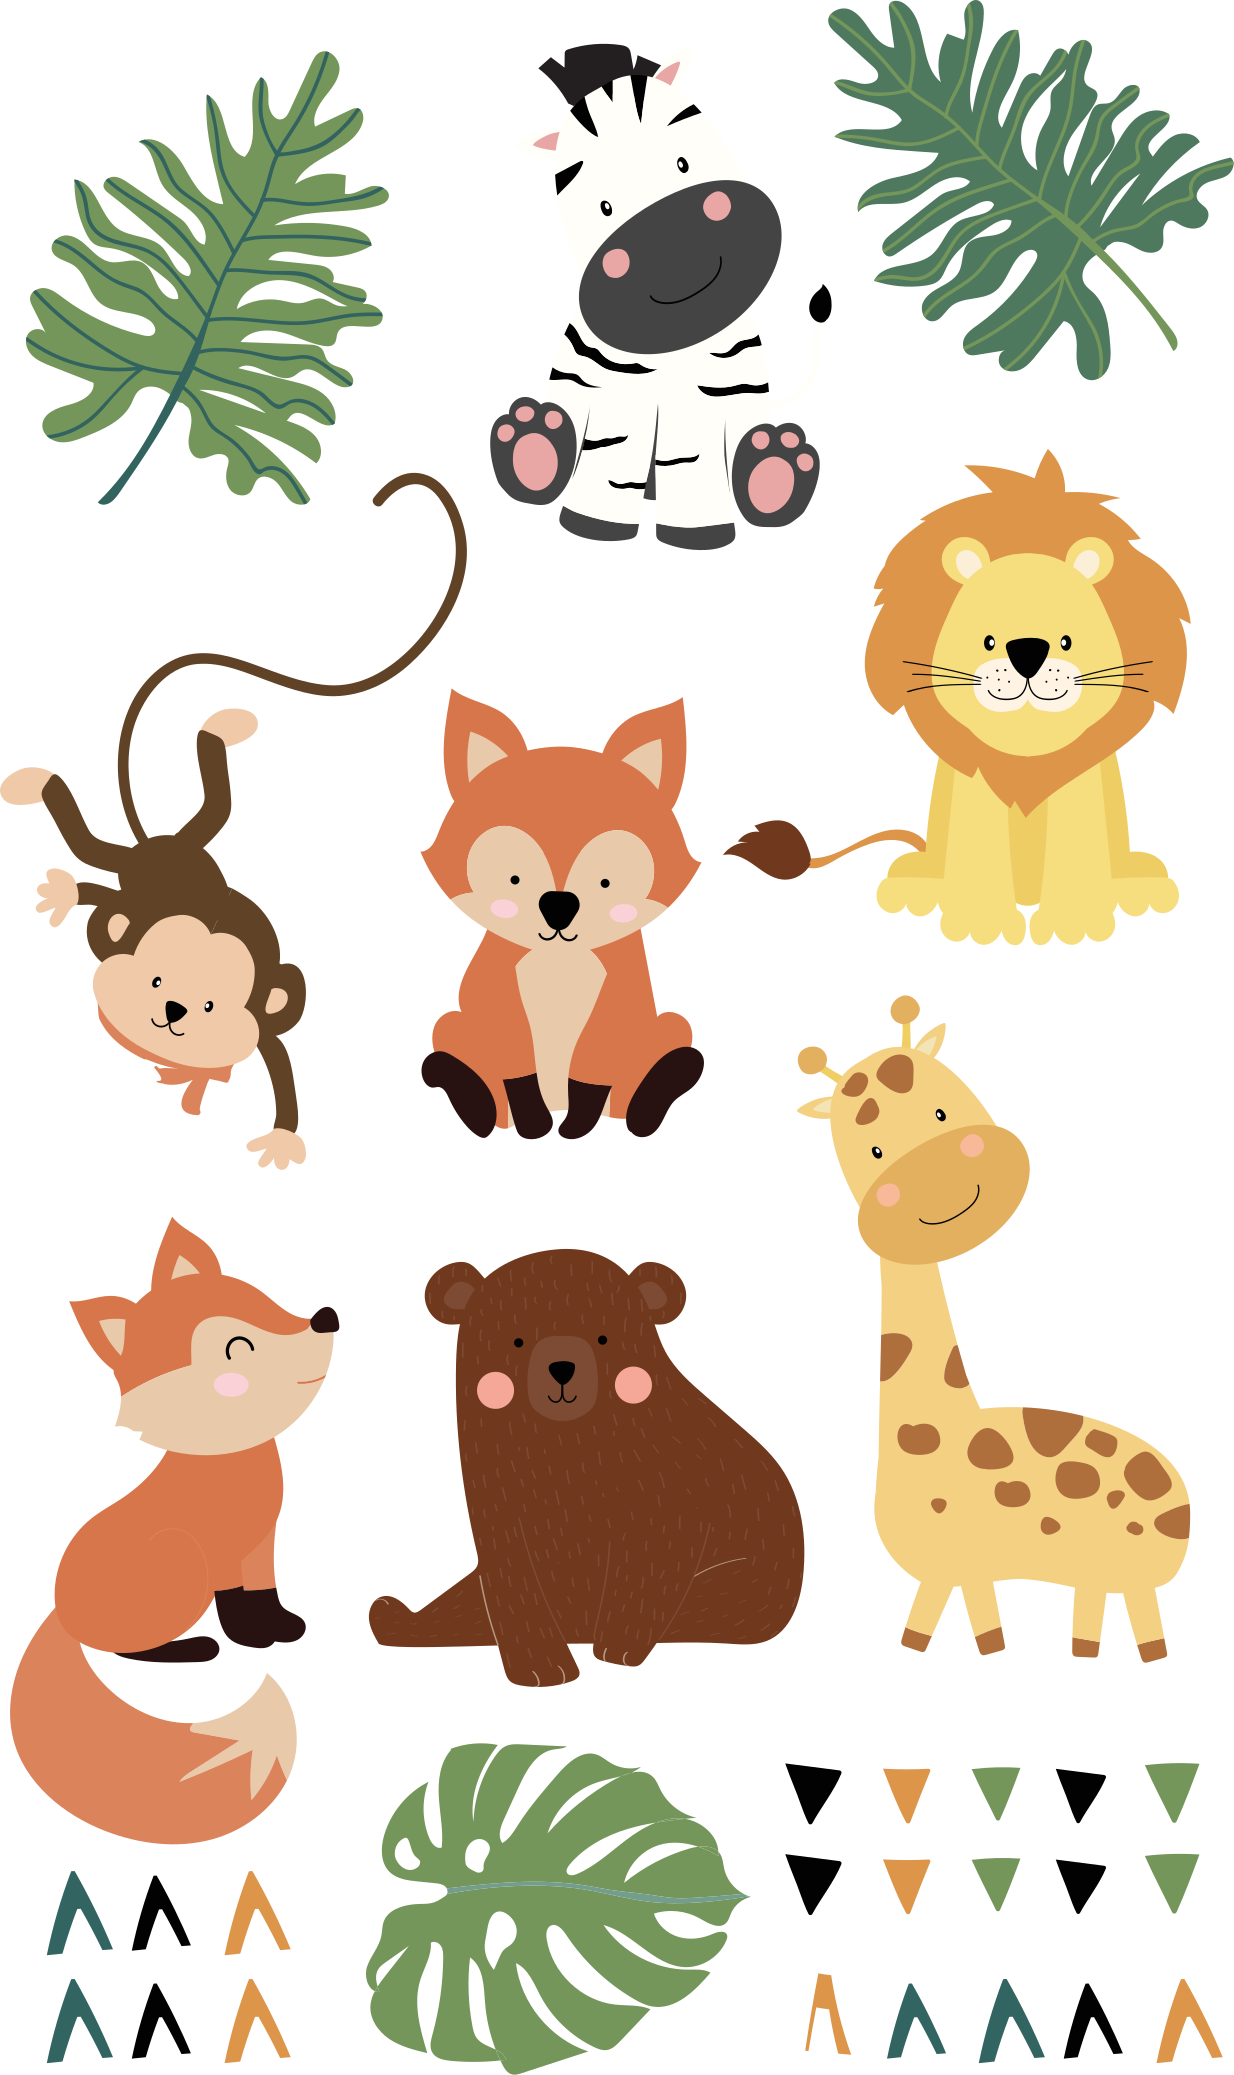 Cute wild animals with leaves wallpaper decal - TenStickers